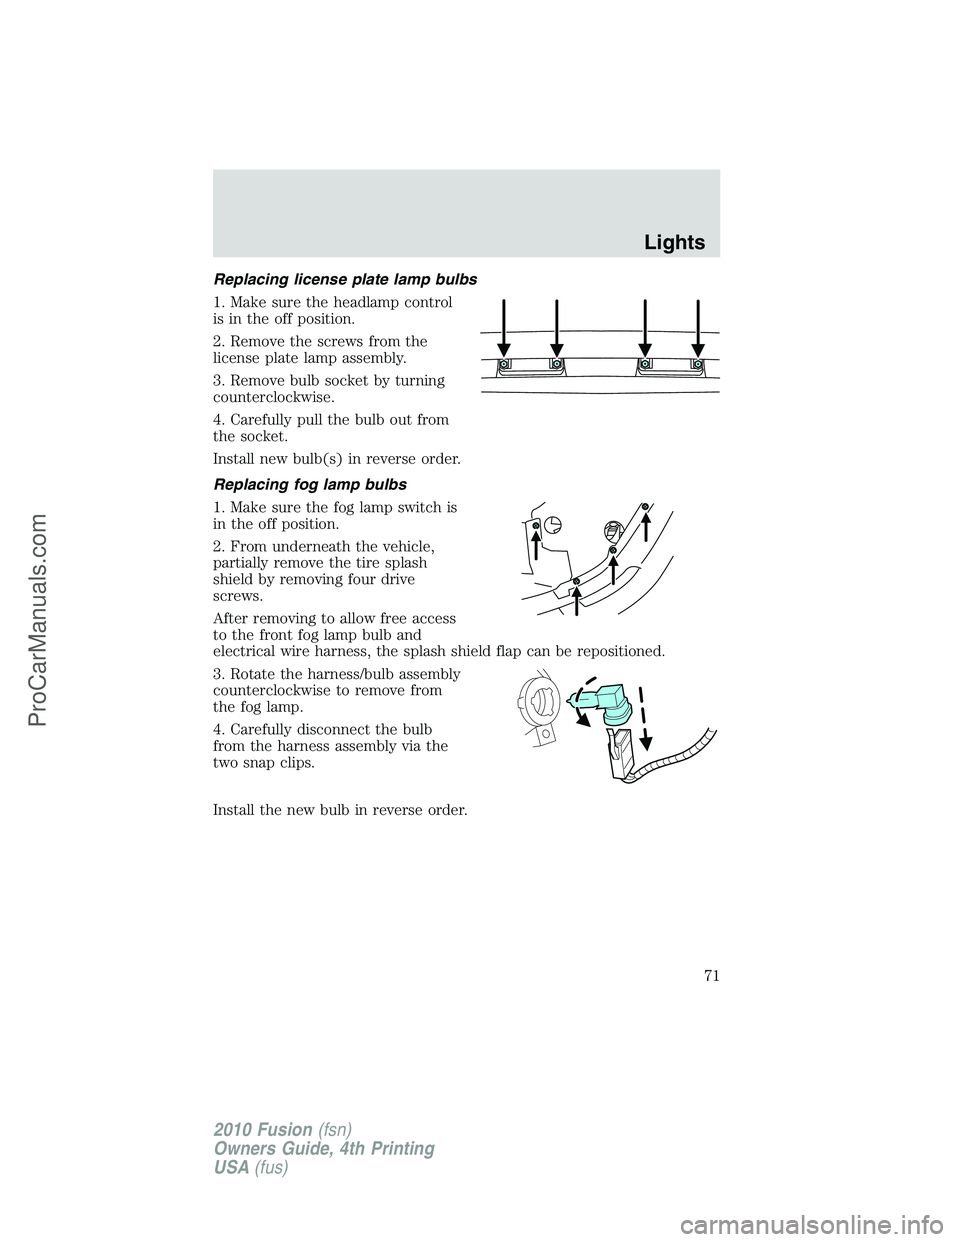 FORD FUSION 2010 Manual PDF Replacing license plate lamp bulbs
1. Make sure the headlamp control
is in the off position.
2. Remove the screws from the
license plate lamp assembly.
3. Remove bulb socket by turning
counterclockwis